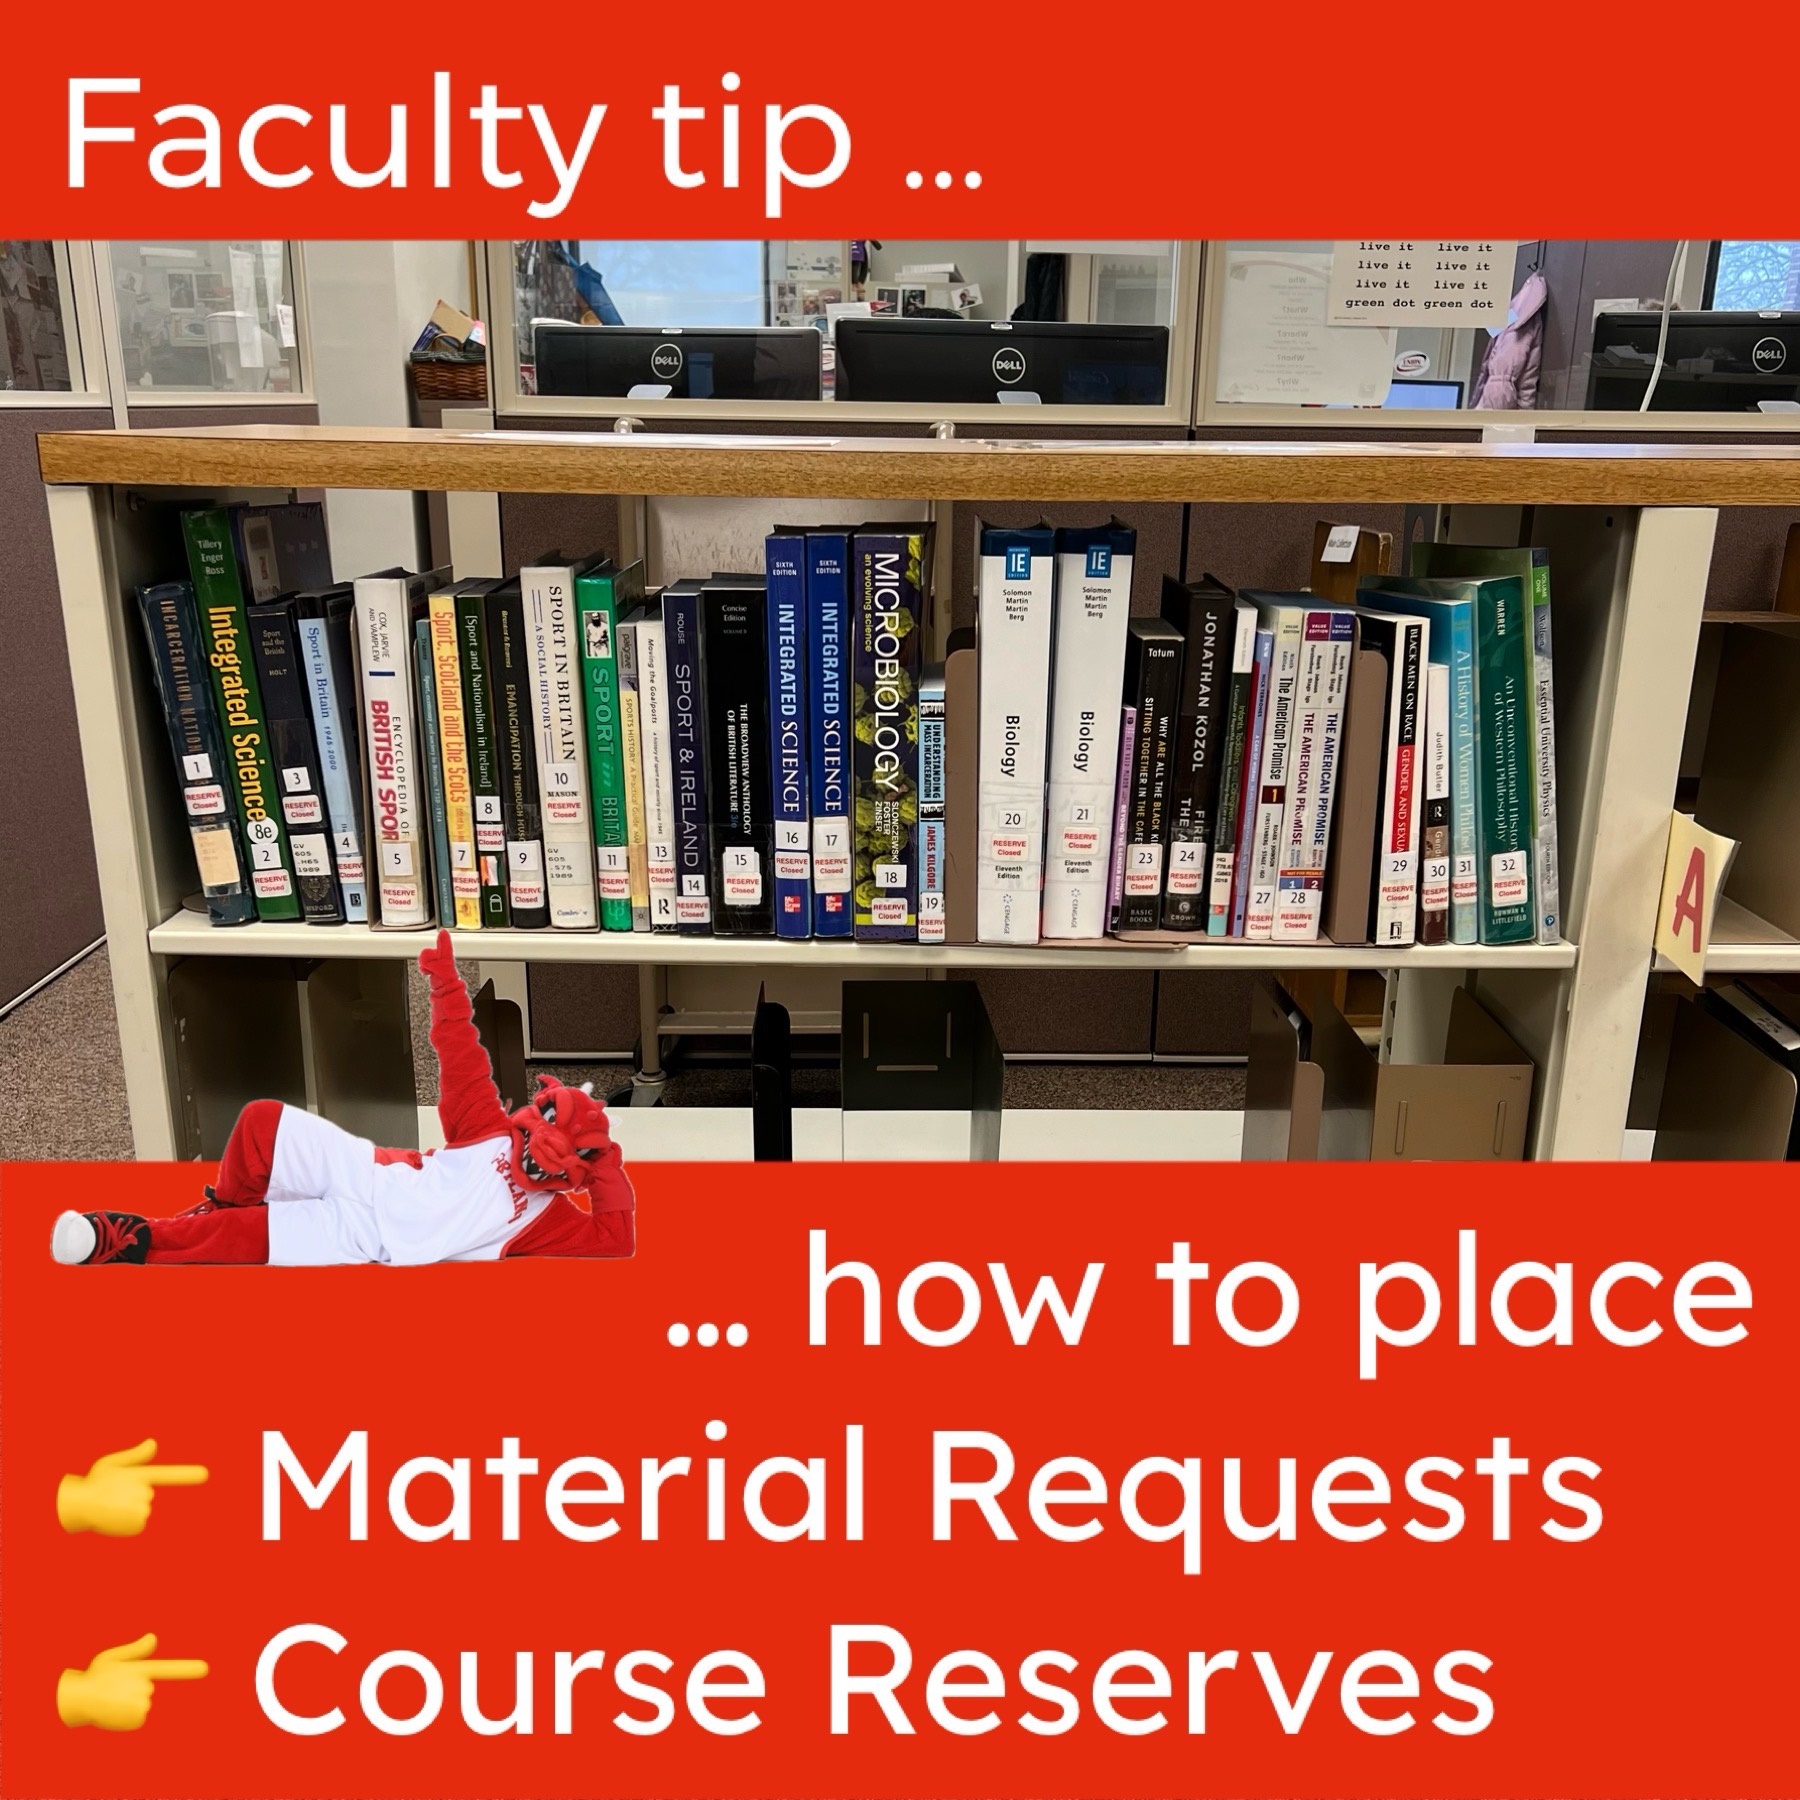 Image advertising the Library’s Helpful Tip to faculty about placing materials requests and course reserves.